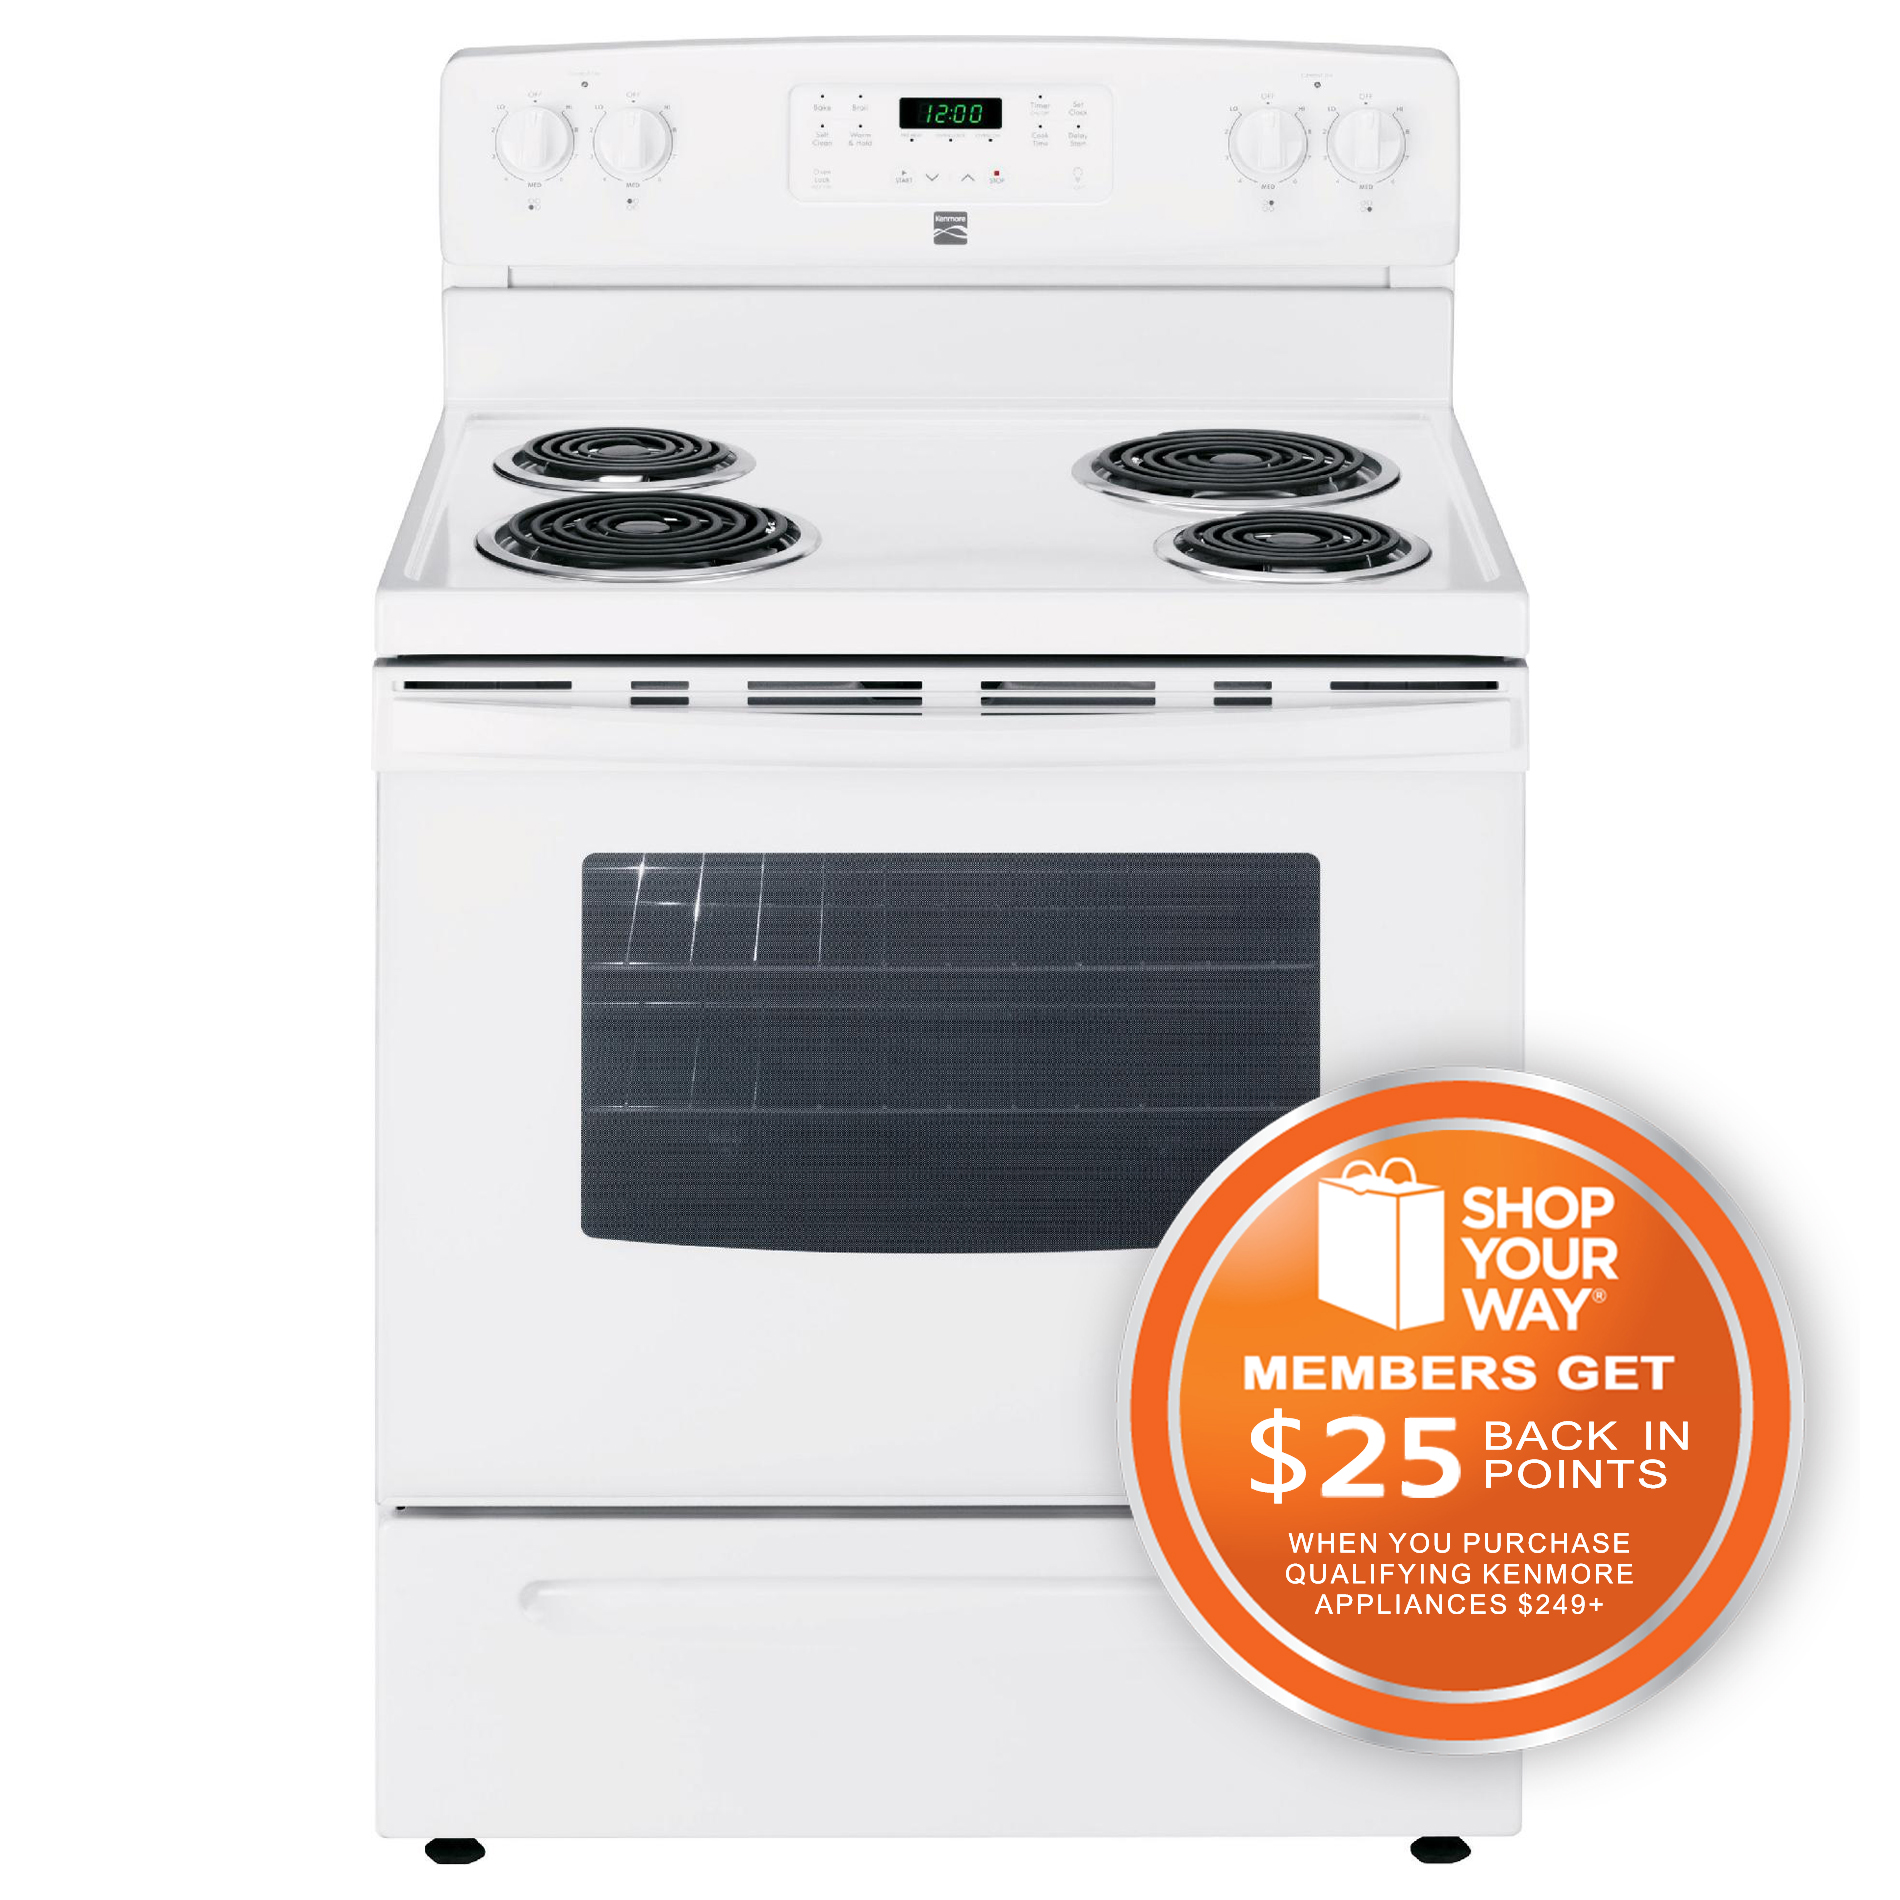 0012505508042 - 94142 5.3 CU. FT. ELECTRIC RANGE W/ SELF-CLEANING OVEN - WHITE